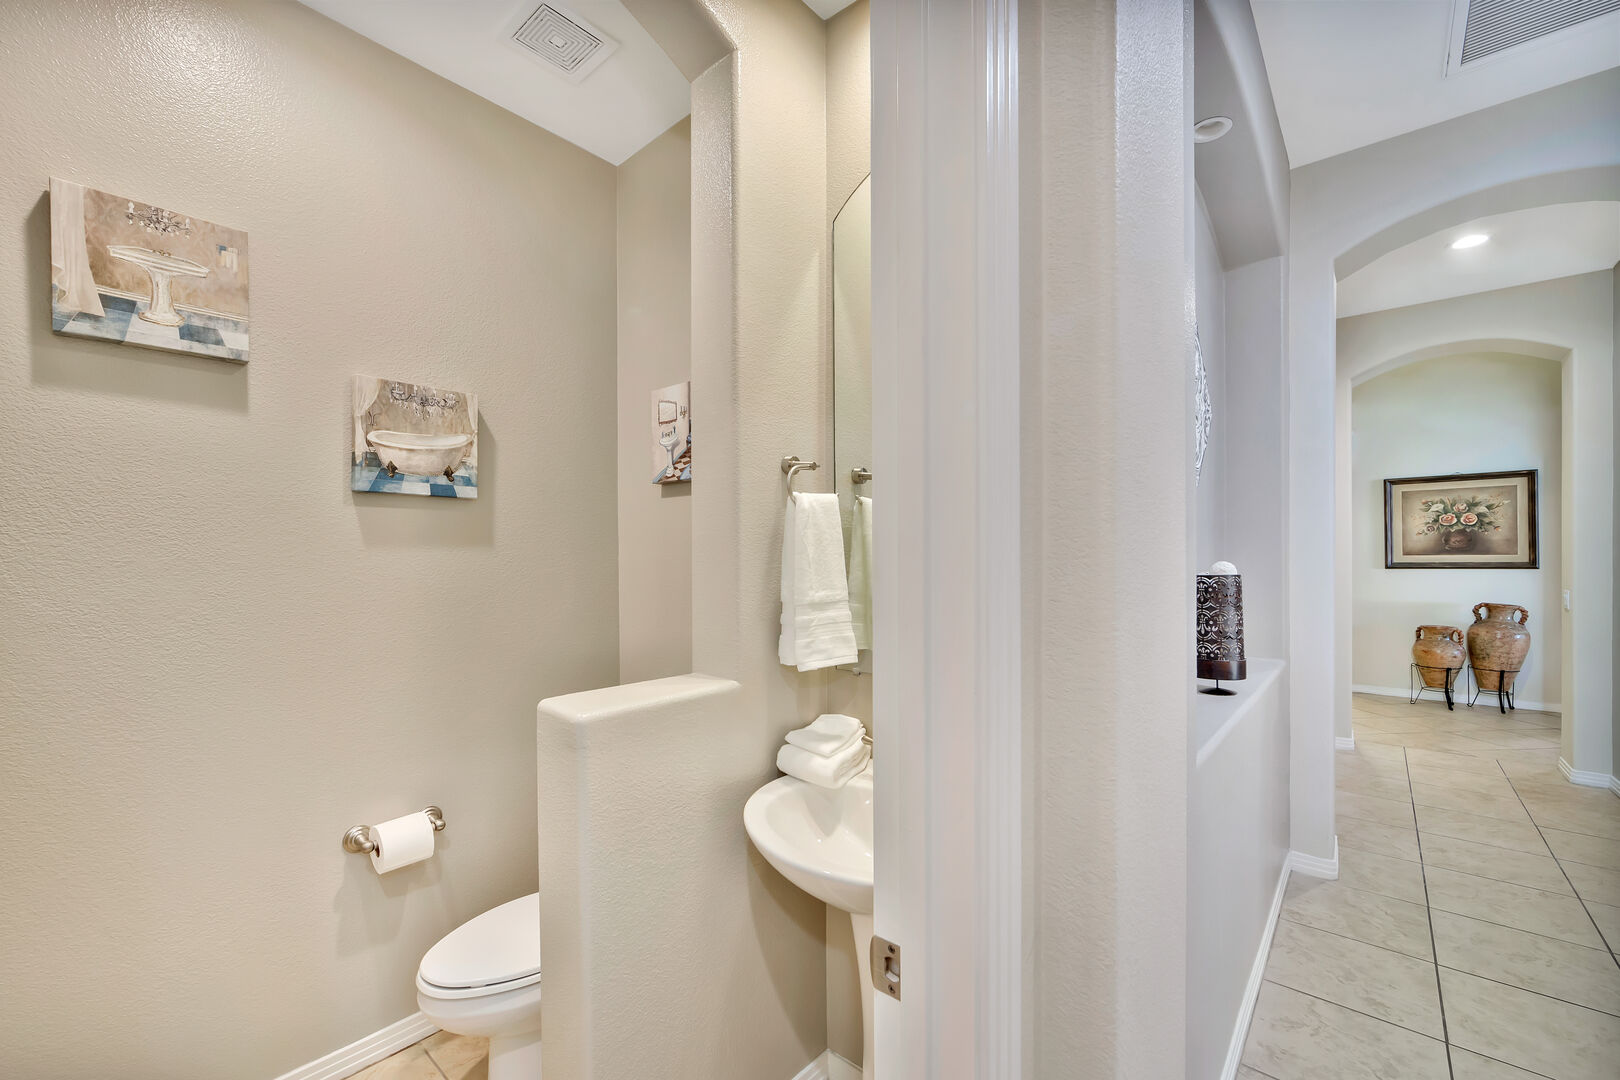 Powder Room 5 is located in the hallway across Master Suite 1 and features a pedestal sink.